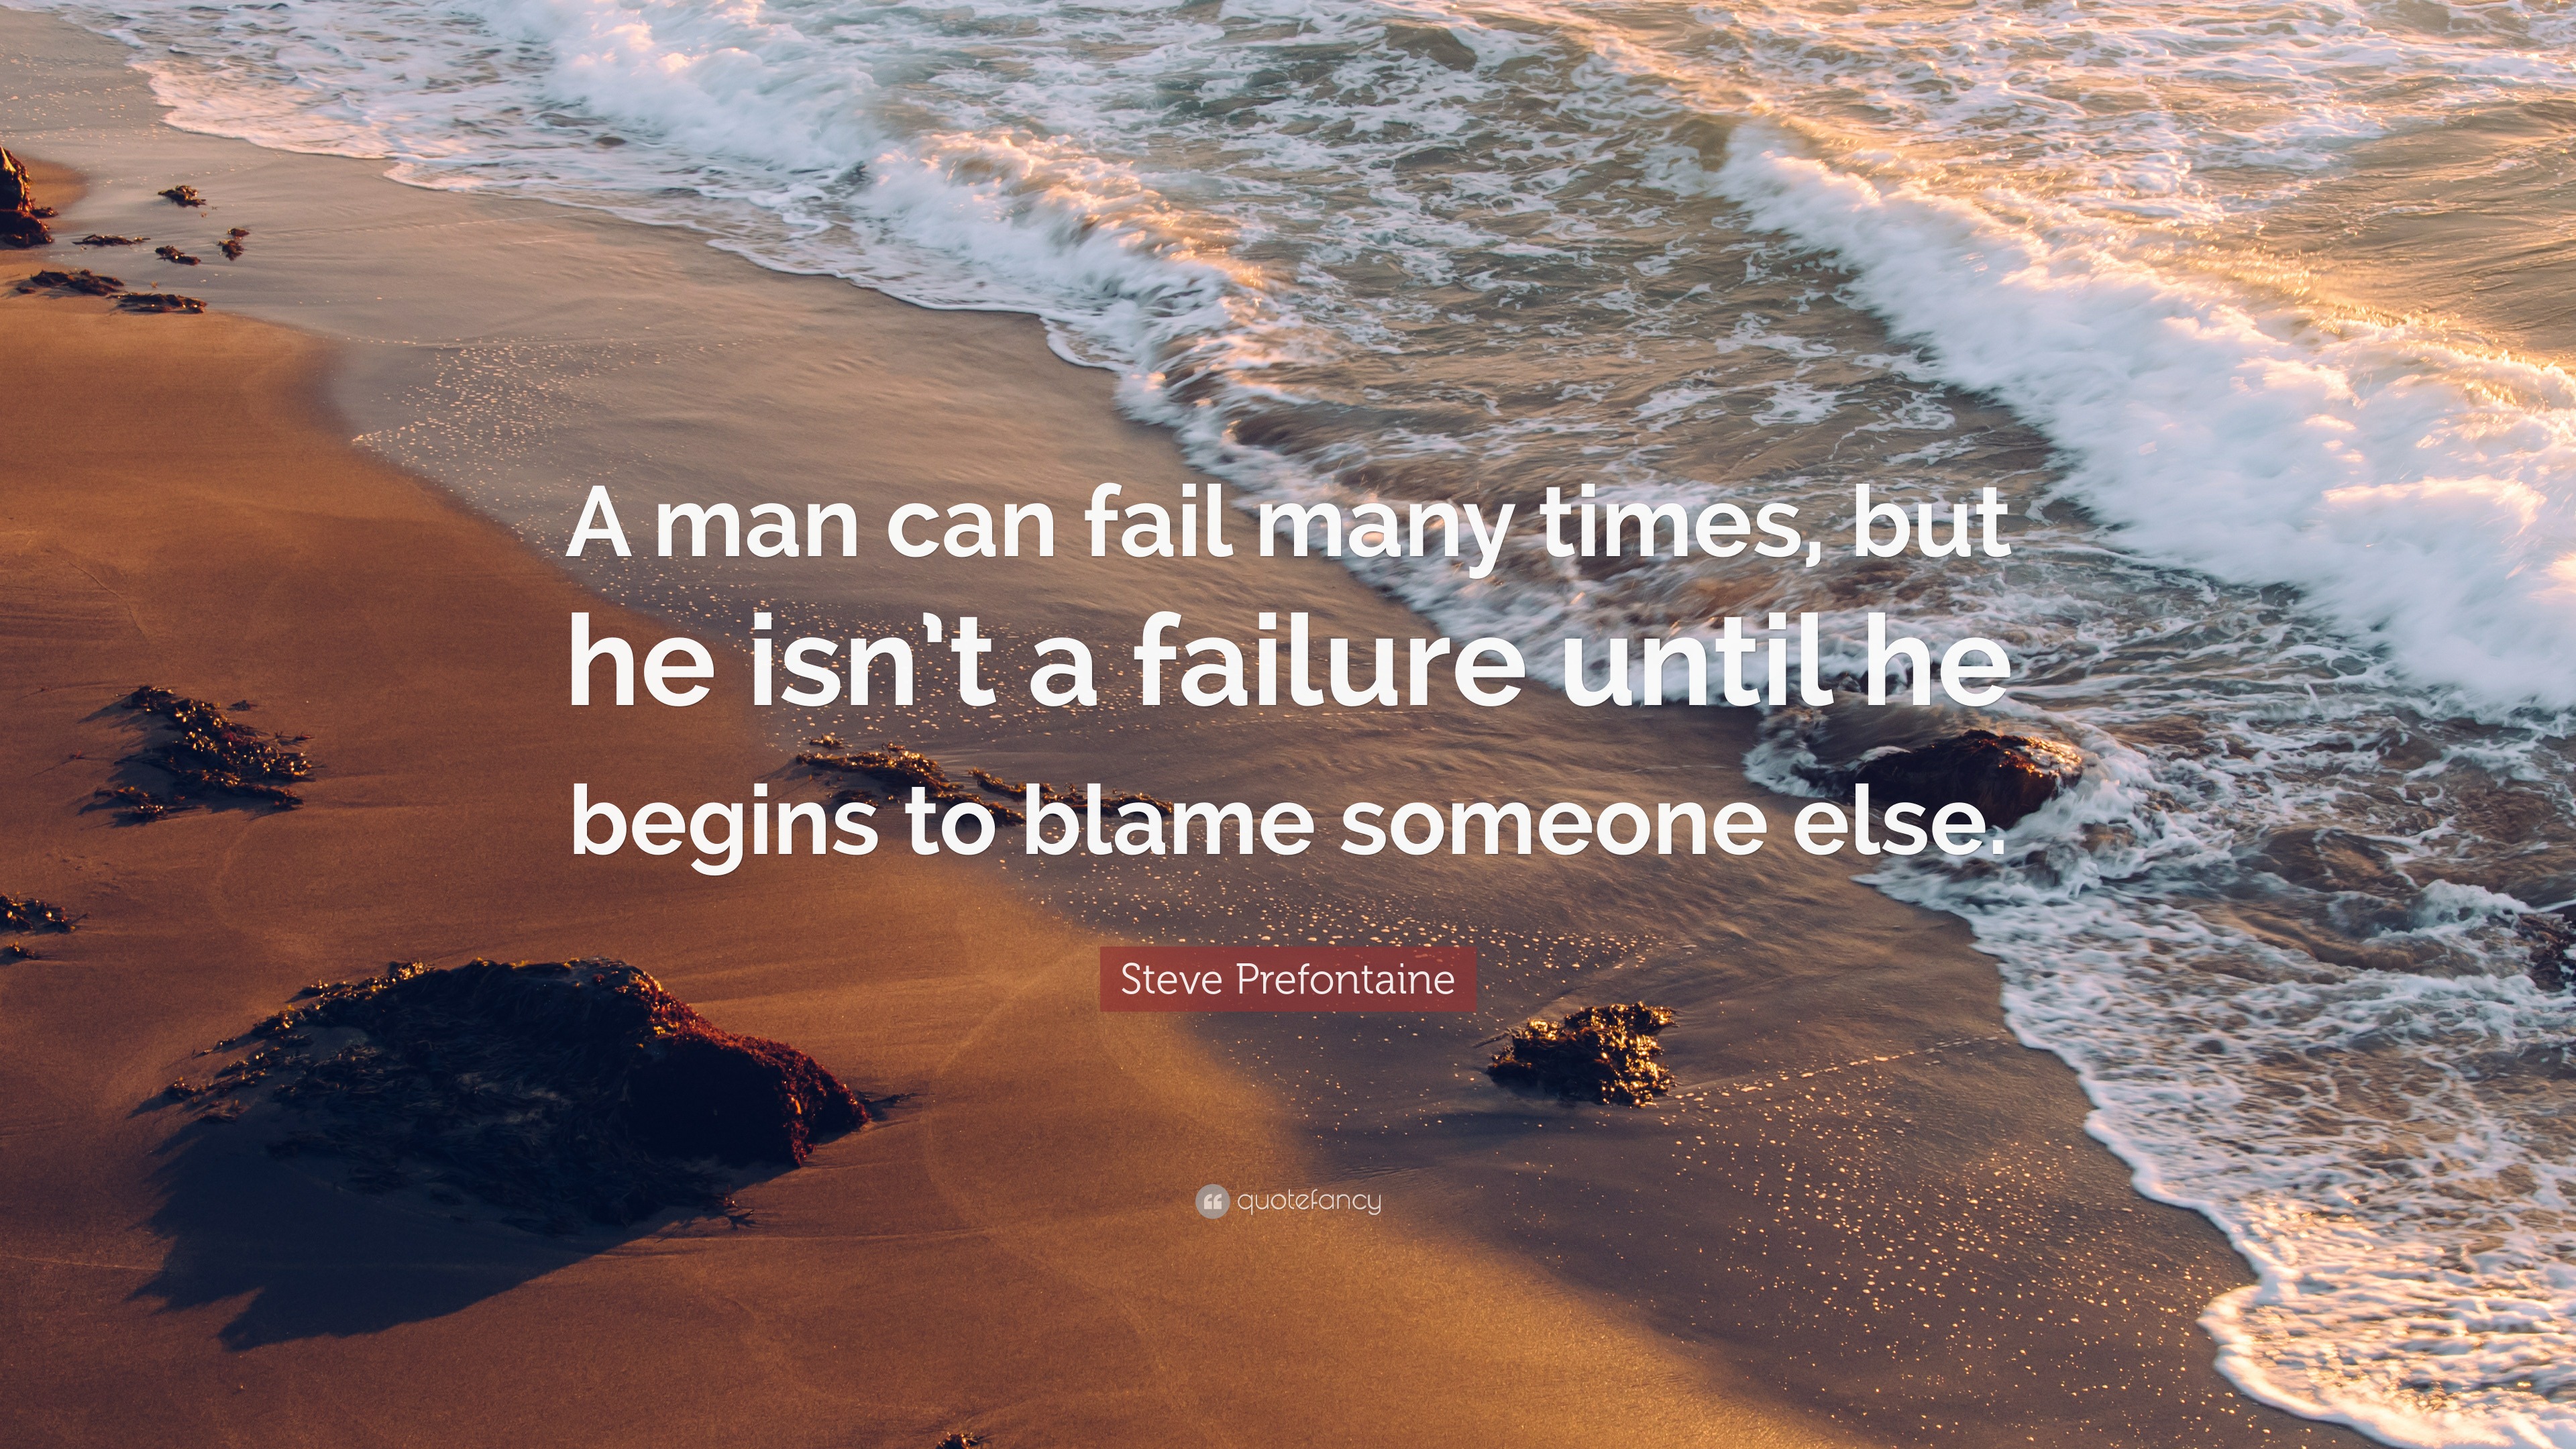 Steve Prefontaine Quote: “A man can fail many times, but he isn’t a